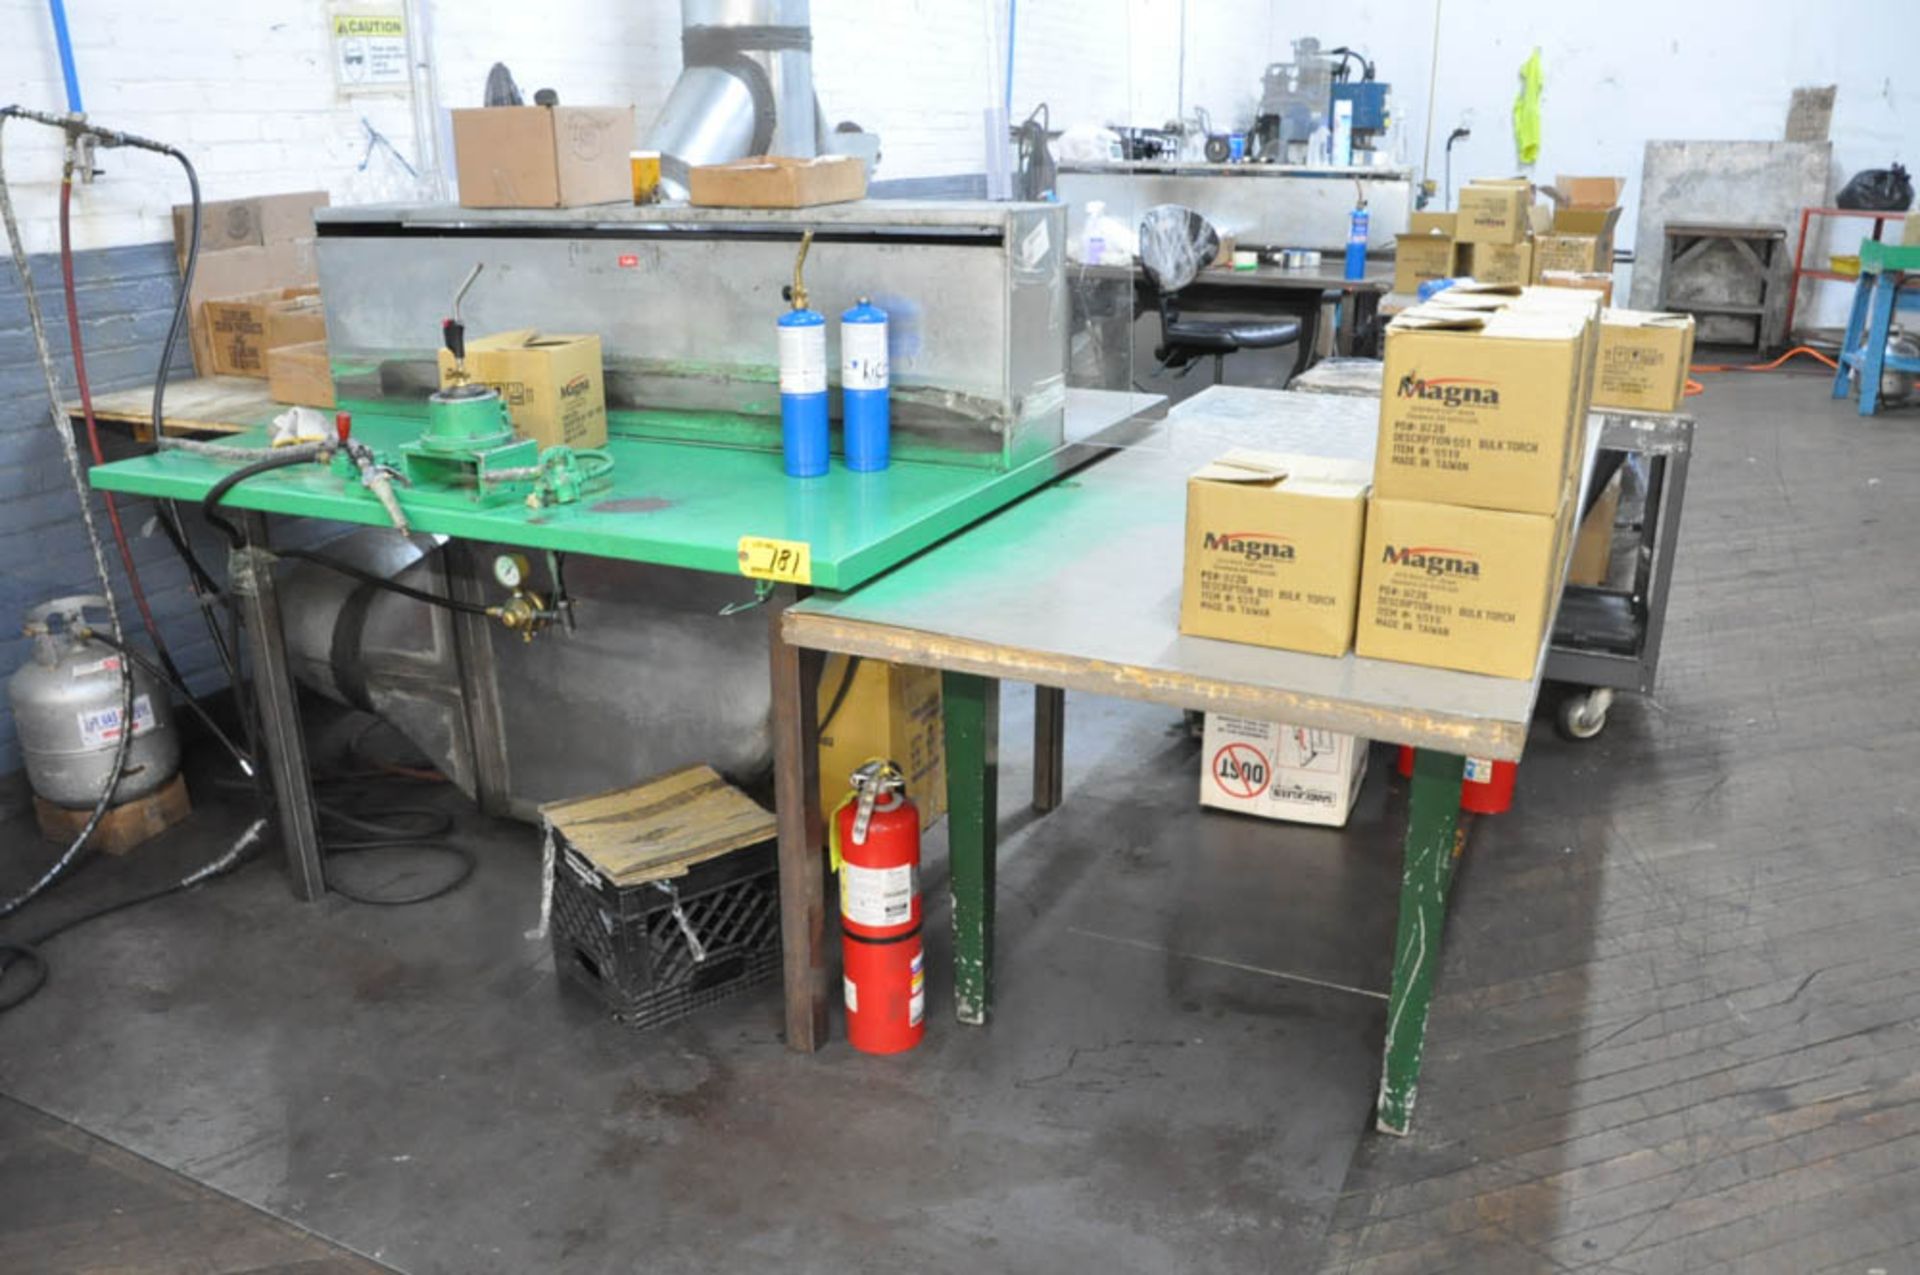 (2) ASSEMBLY STATIONS WITH PNEUMATIC CLAMPING FIXTURES AND (1) EXTRA BENCH WITH STOOLS